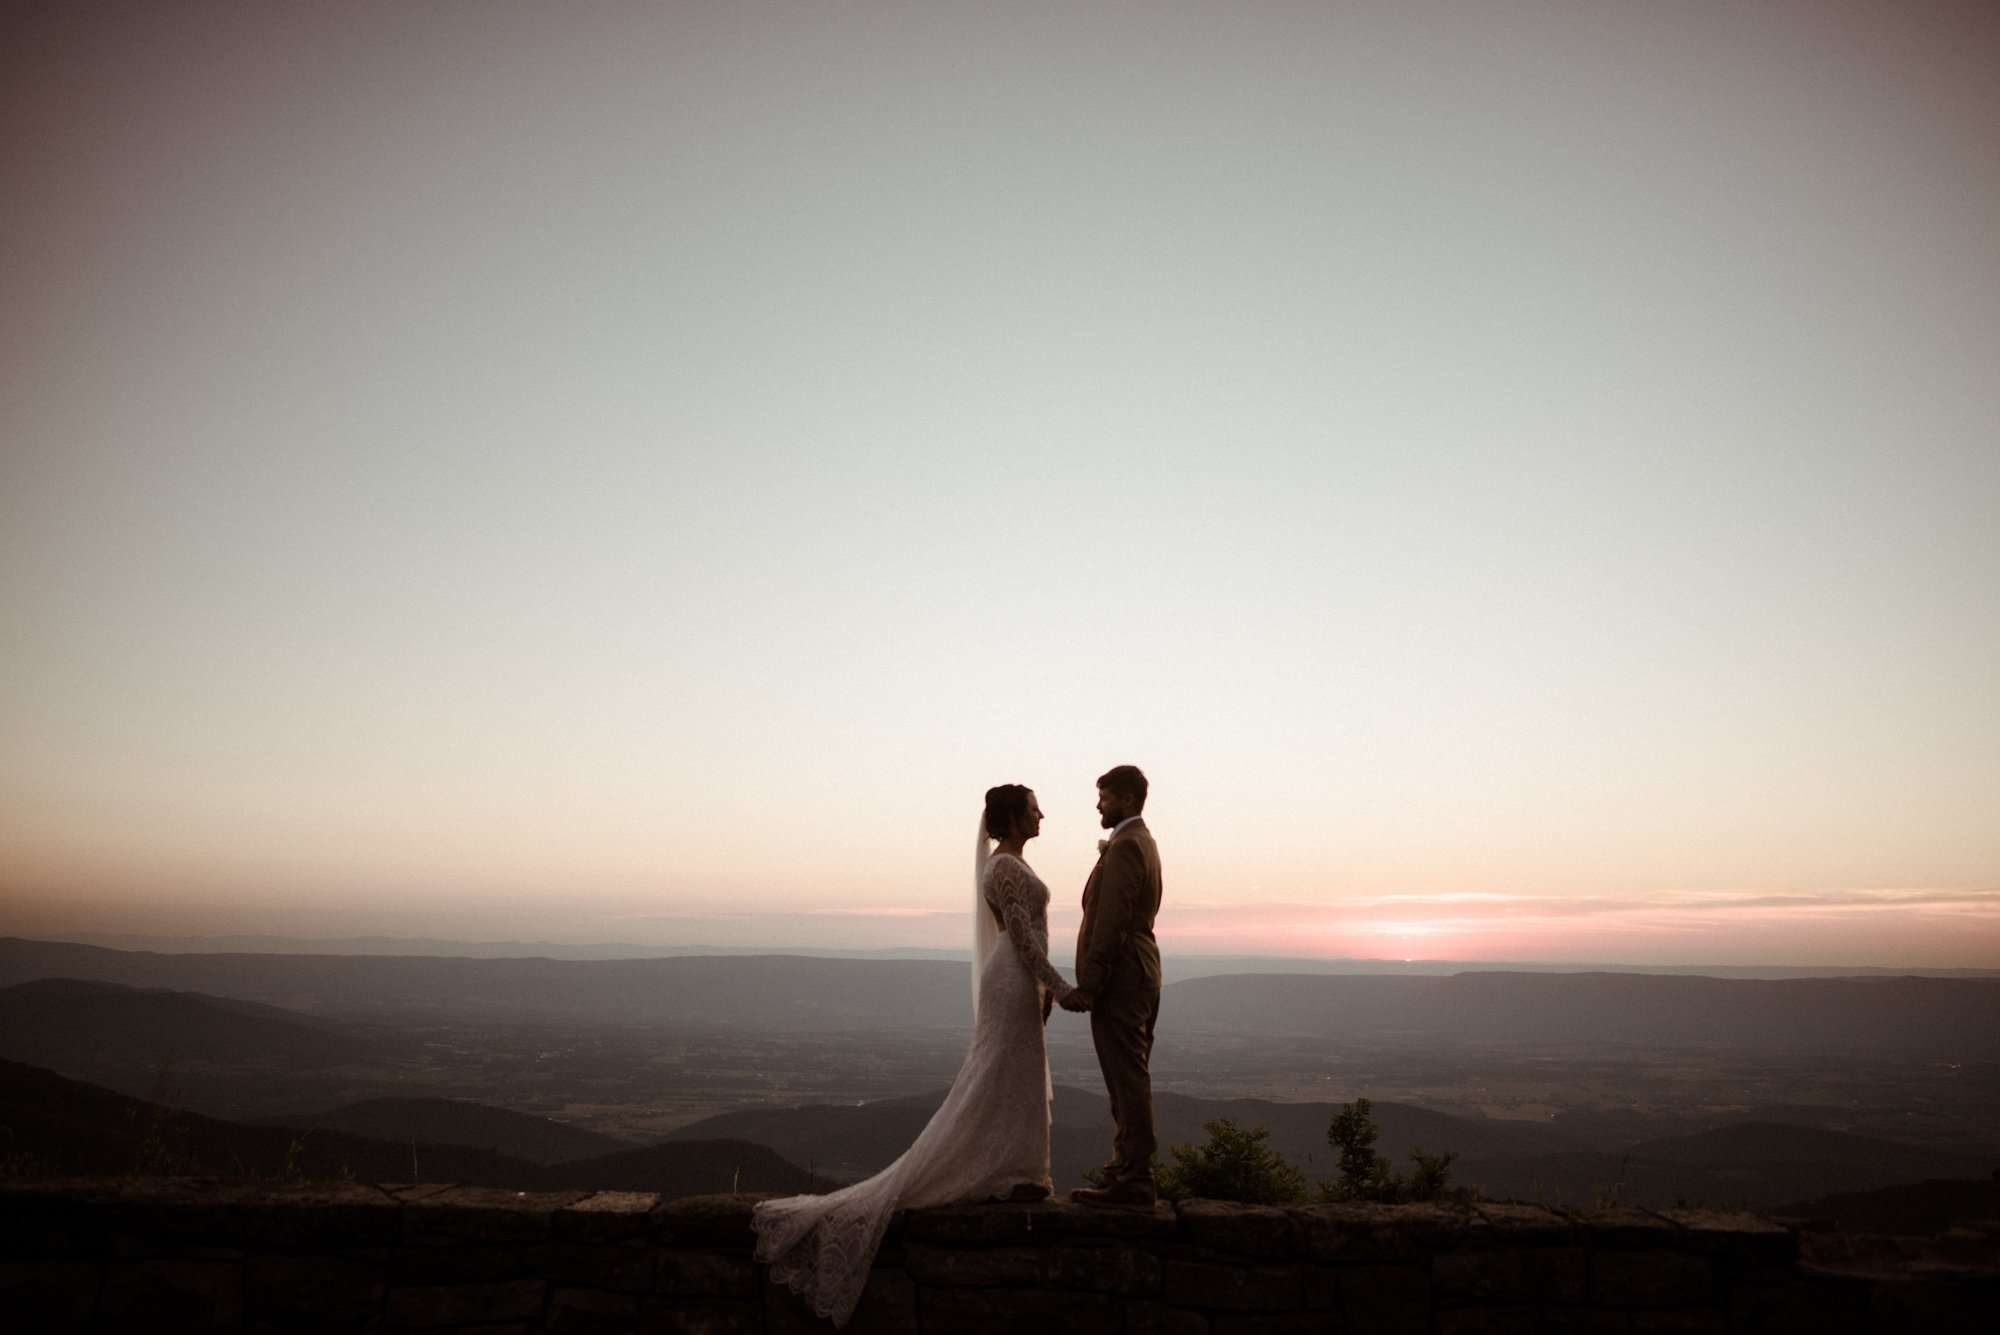 Sunset+Elopement+on+Stony+Man+Summit+in+Shenandoah+National+Park+-+White+Sails+Creative+Elopement+Photography+-+July+Elopement+on+the+Blue+Ridge+Parkway_73.jpg